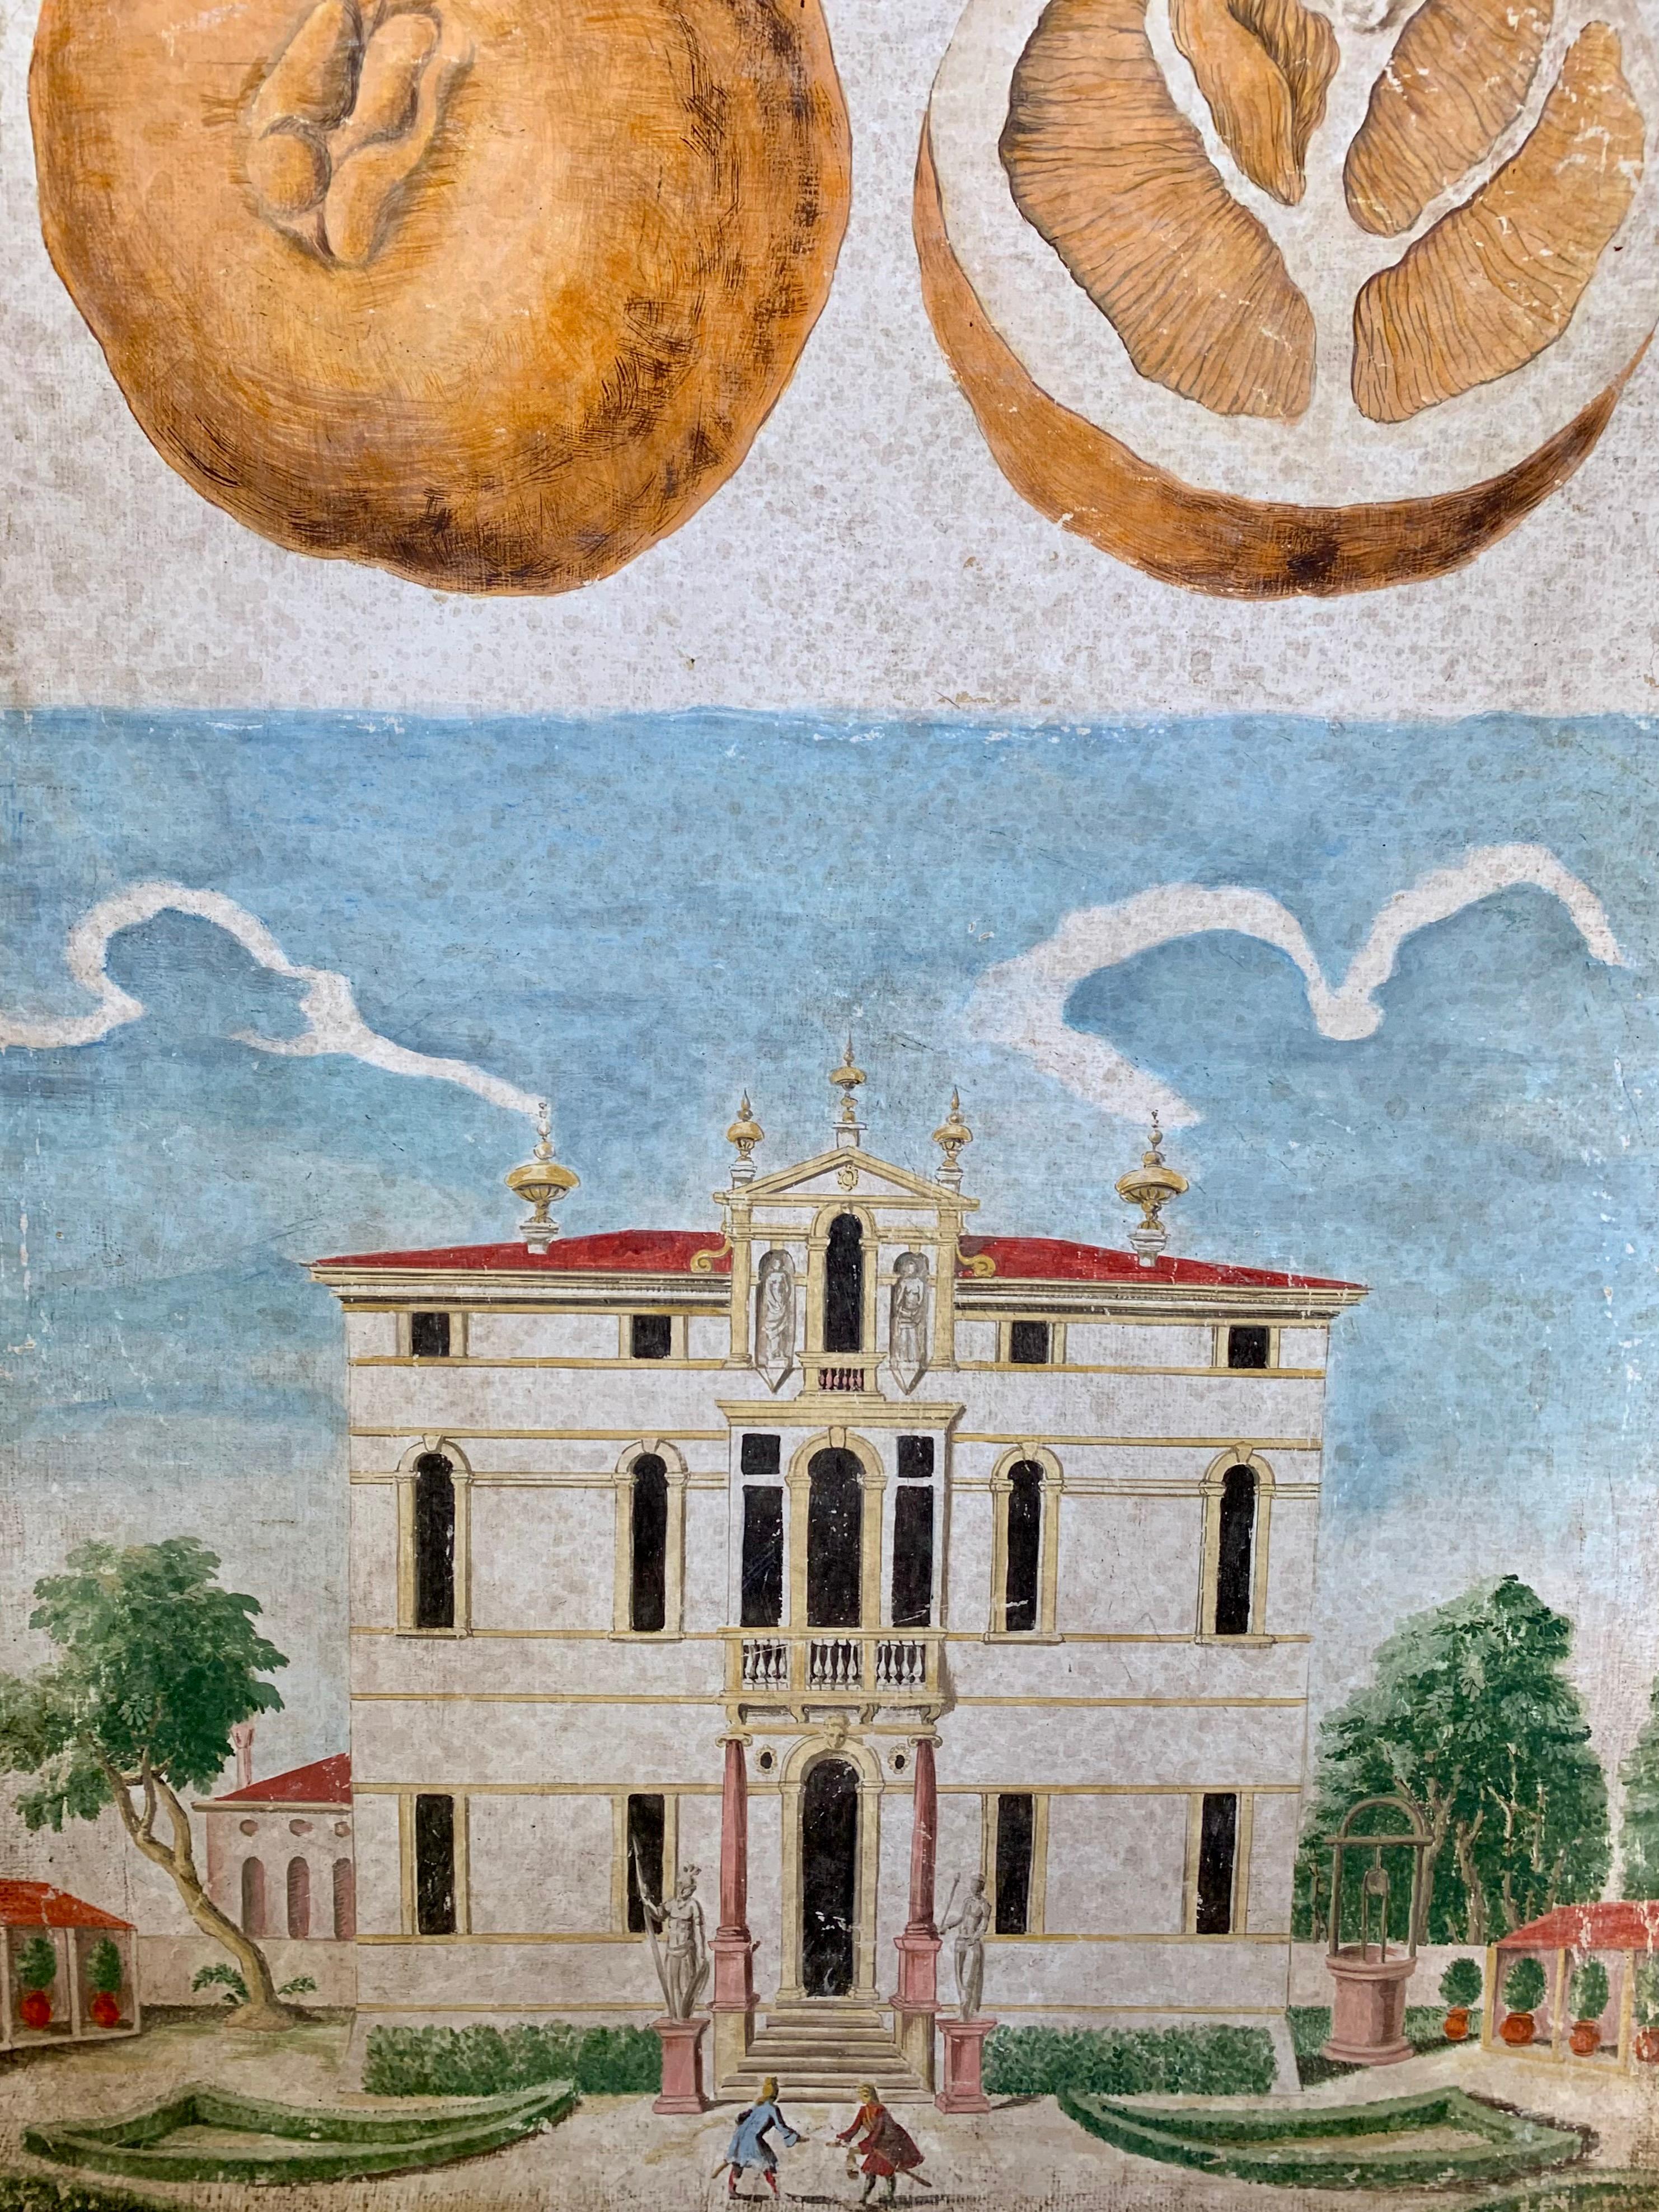 Decorative new Italian painting with fruit, and an 18th century scenery of a palace with a garden, and people. Great colors and very skillfully painted.
